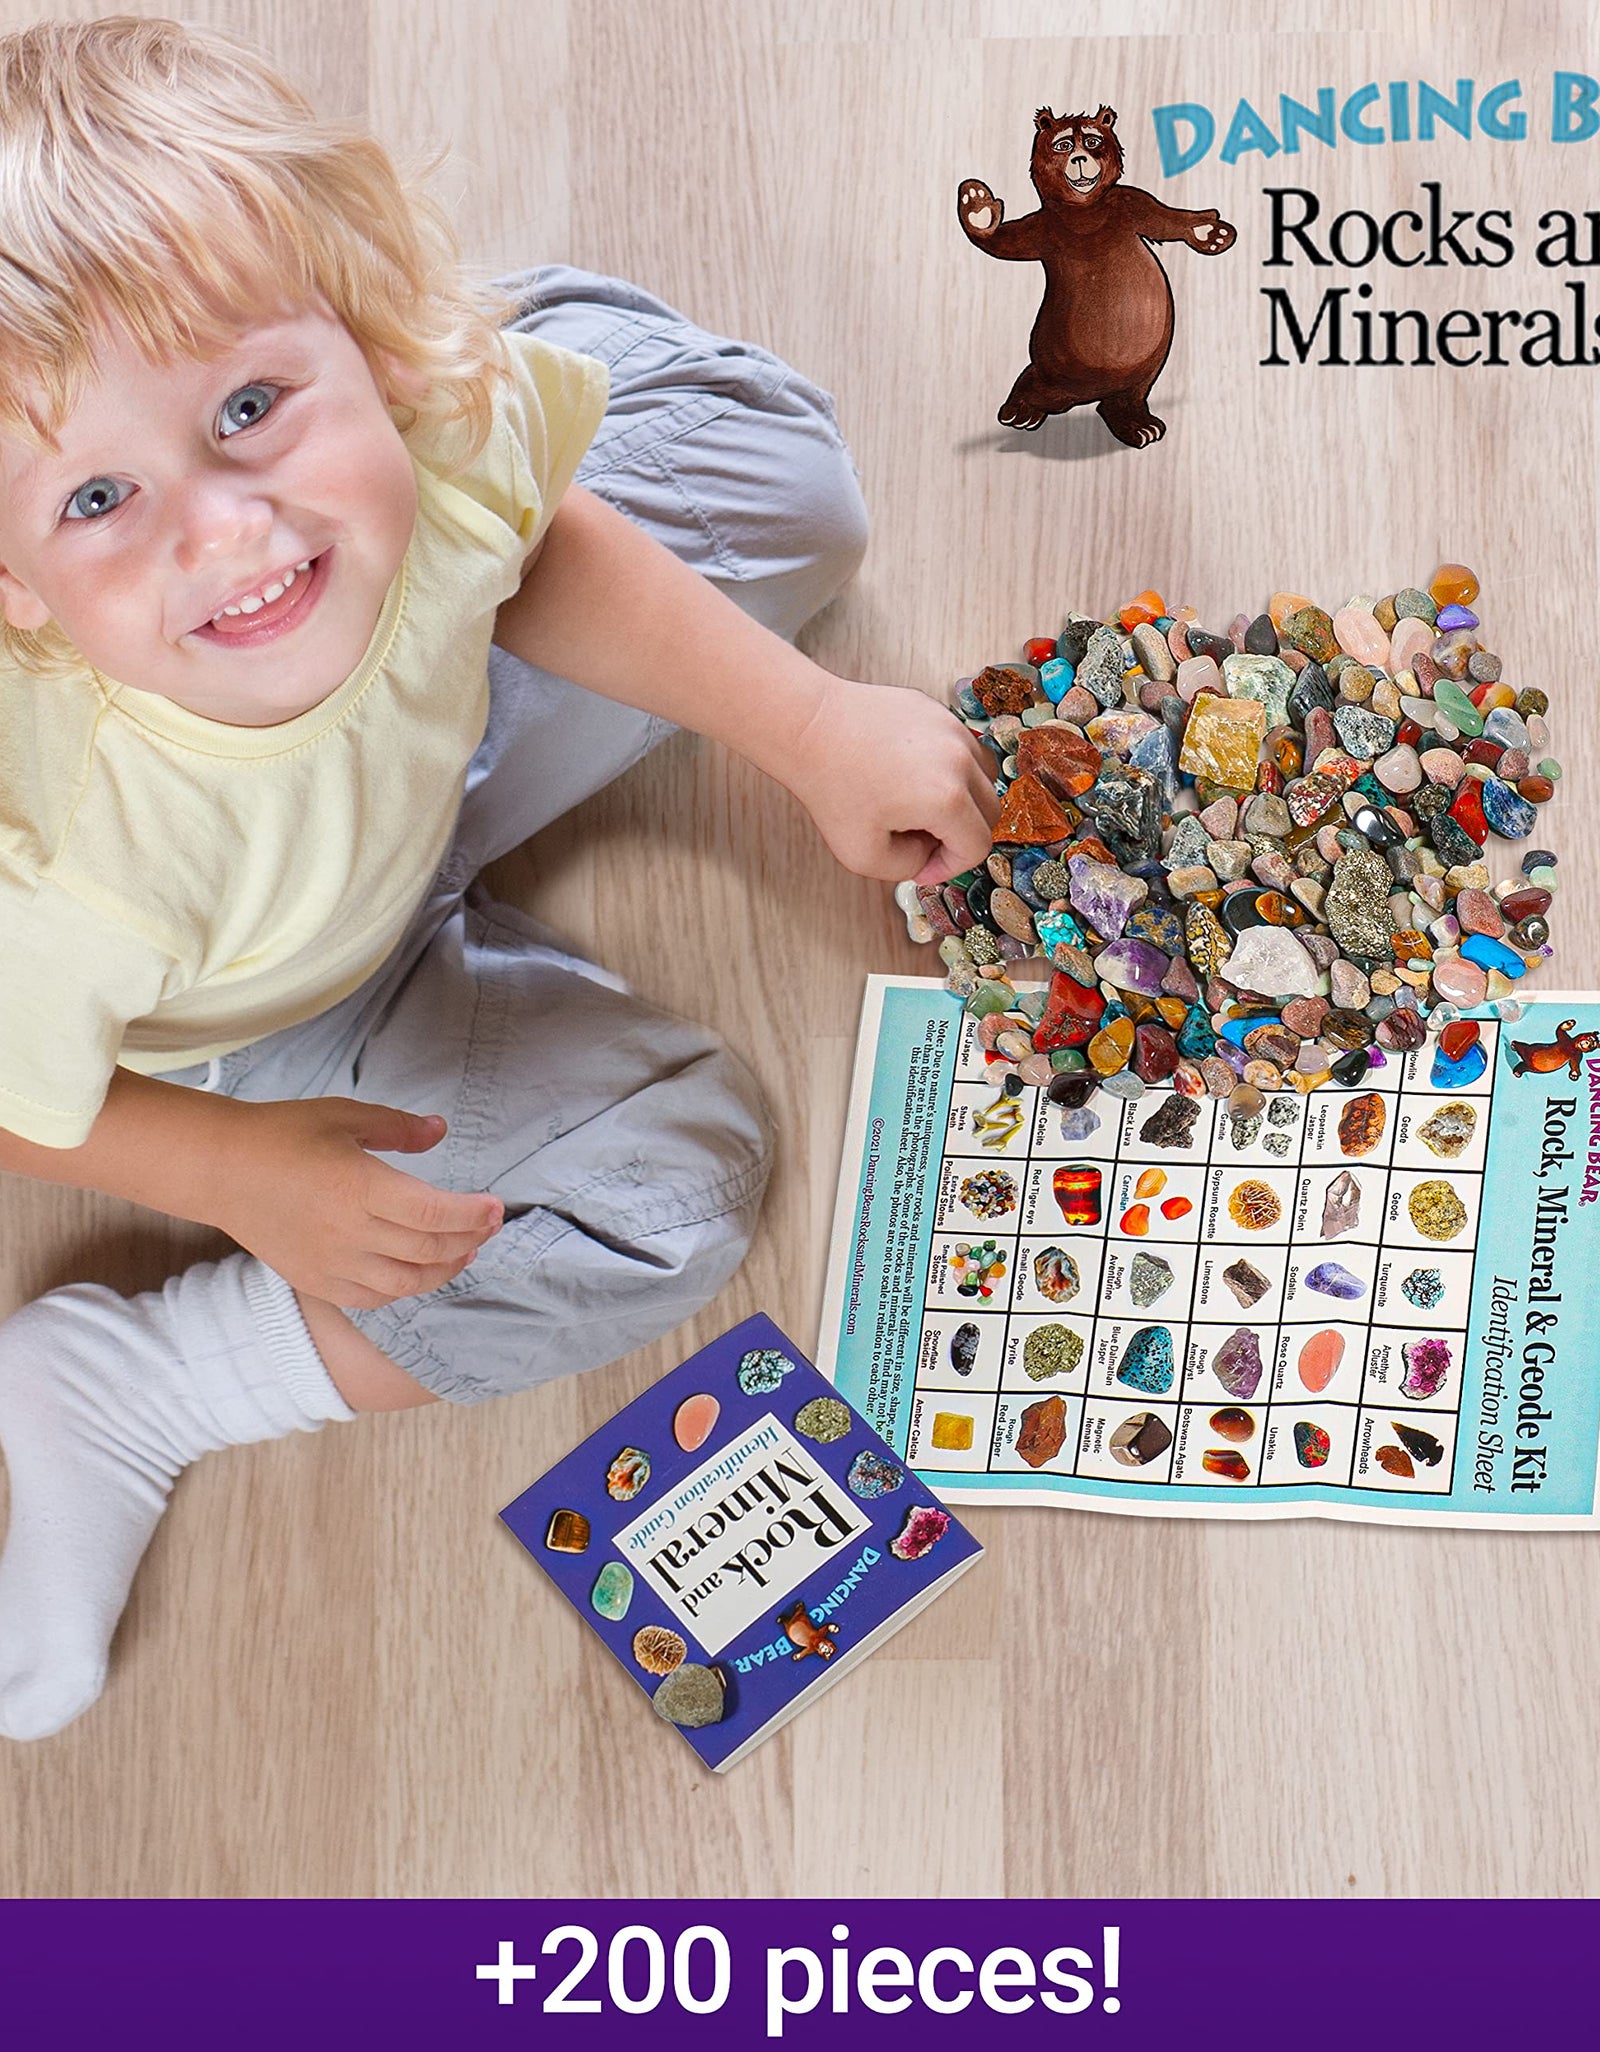 Dancing Bear Rock & Mineral Collection Activity Kit (200+Pcs) with Geodes, Shark Teeth Fossils, Arrowheads, Crystals, Gemstones for Kids, Rock Book, Treasure Hunt ID Sheet, STEM Education, Made in USA